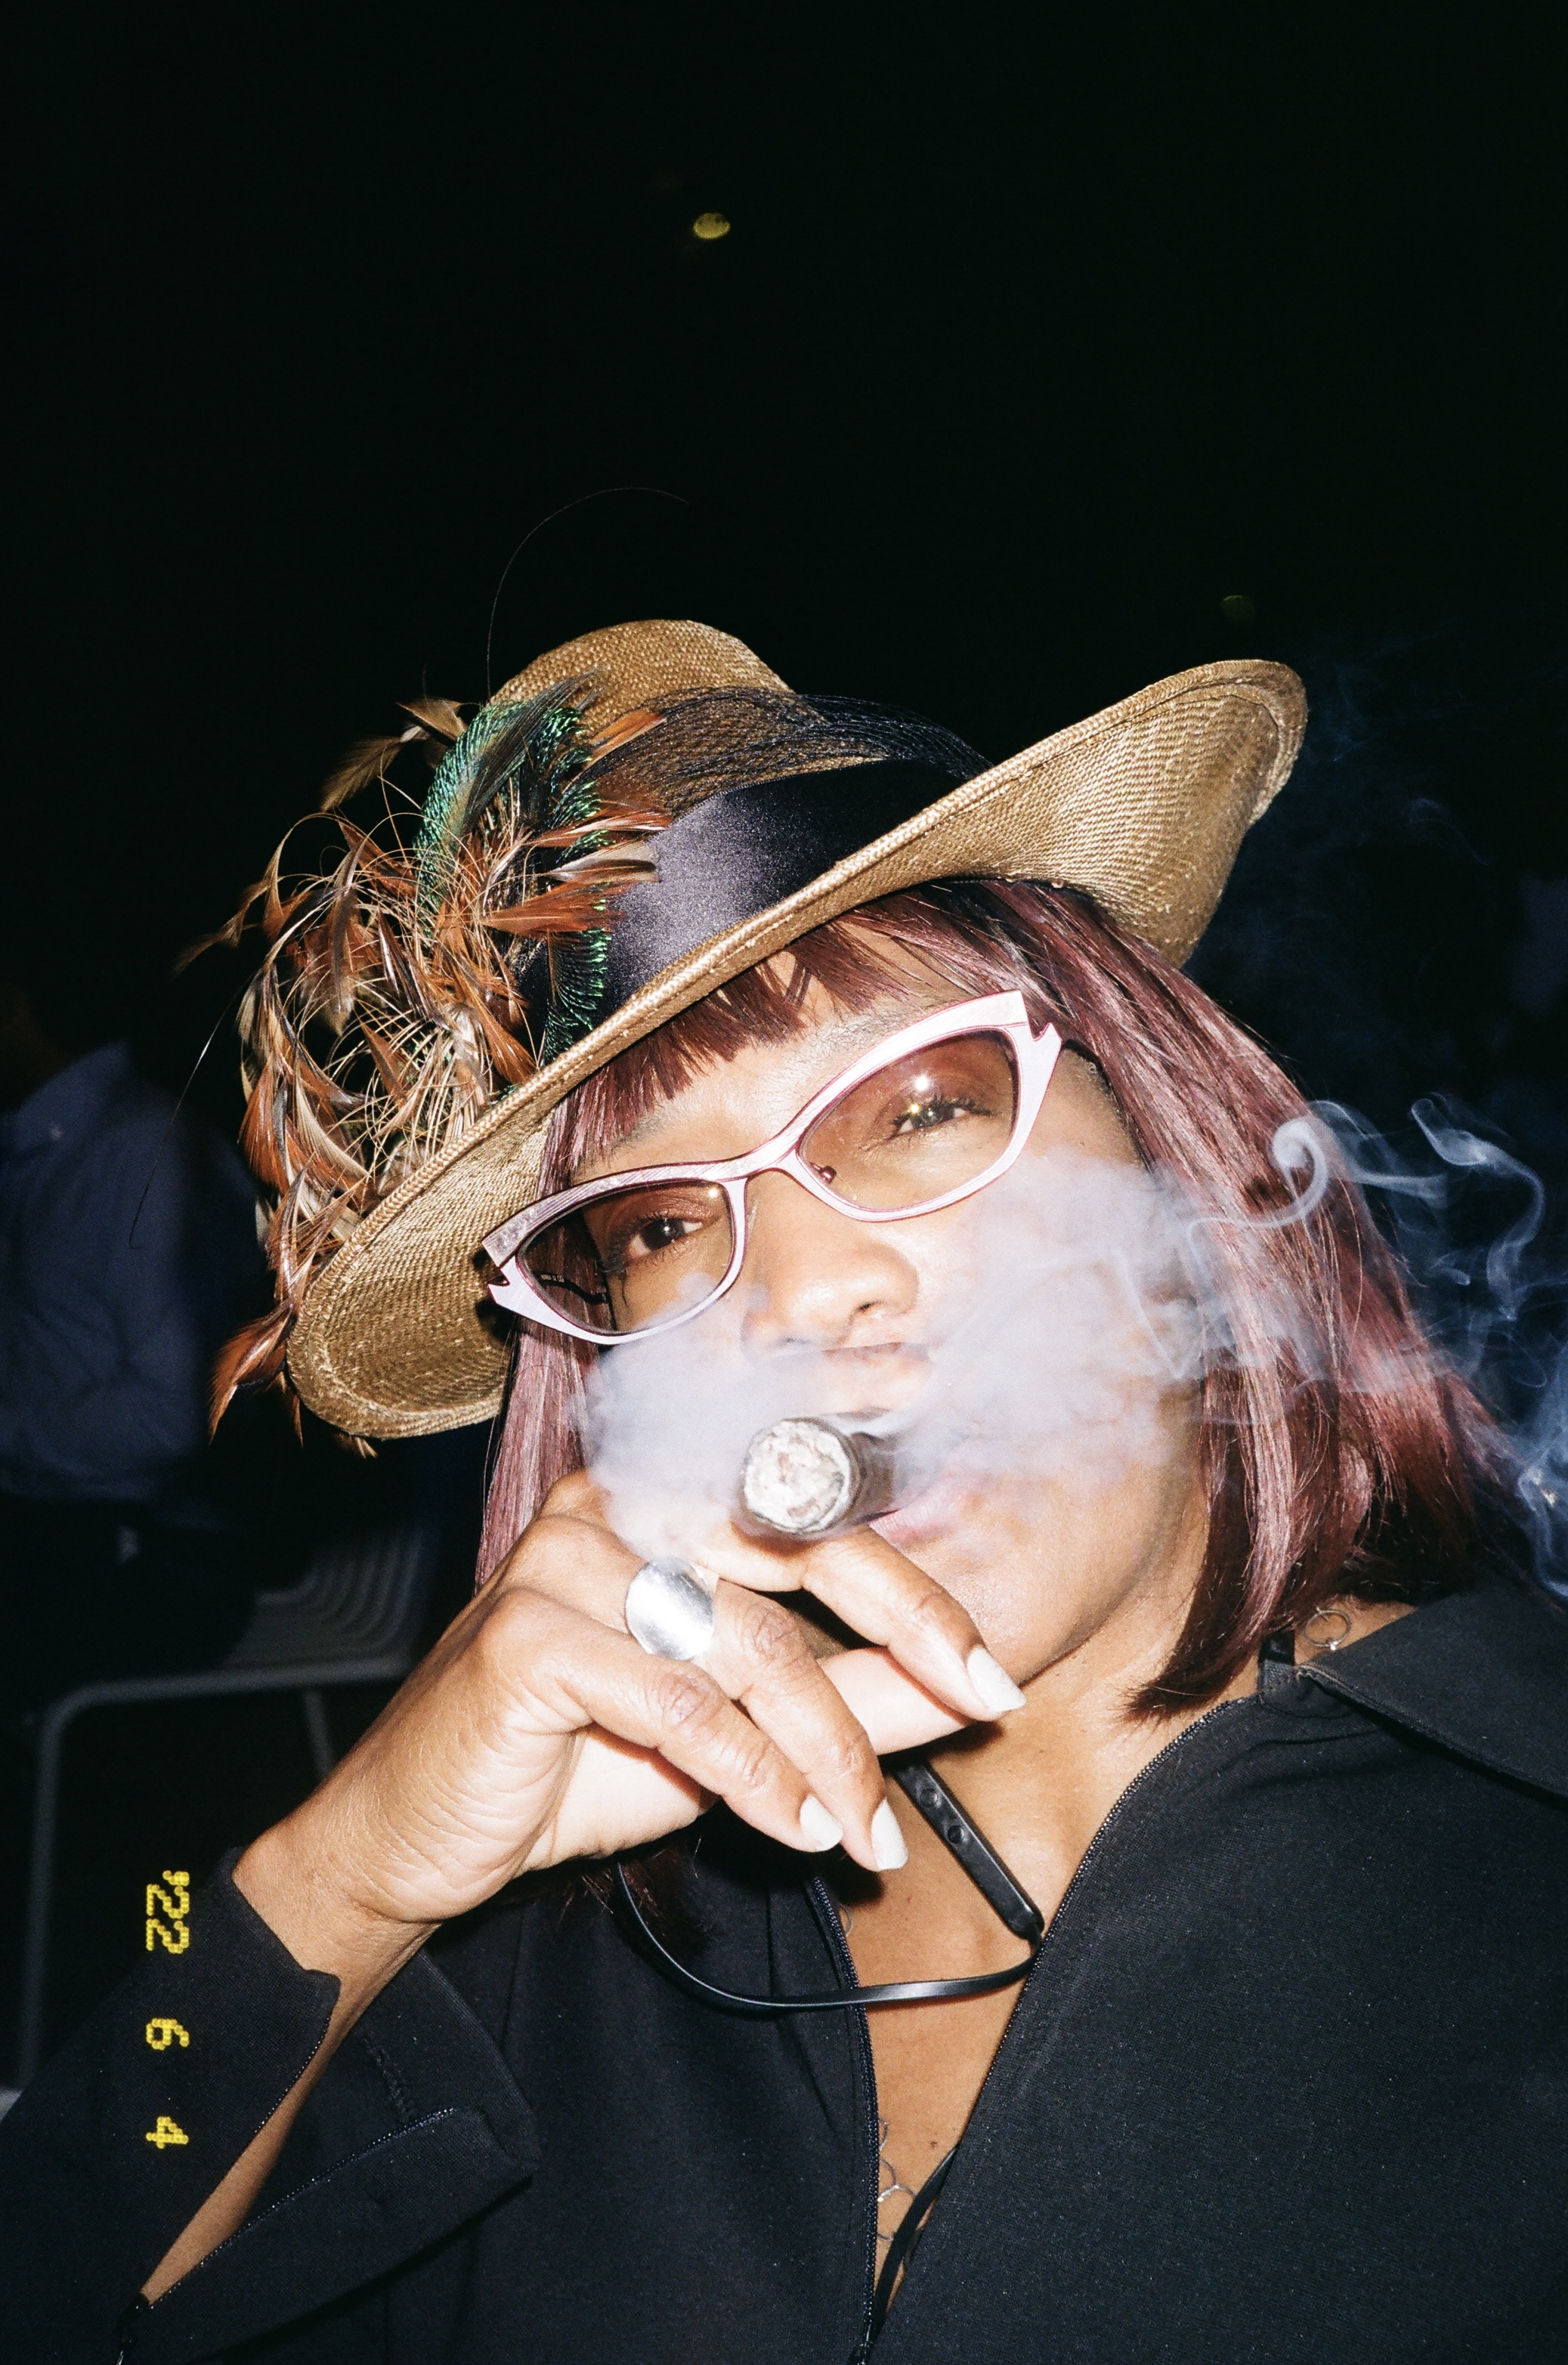     A woman in a straw hat and sunglasses smoking a cigar.